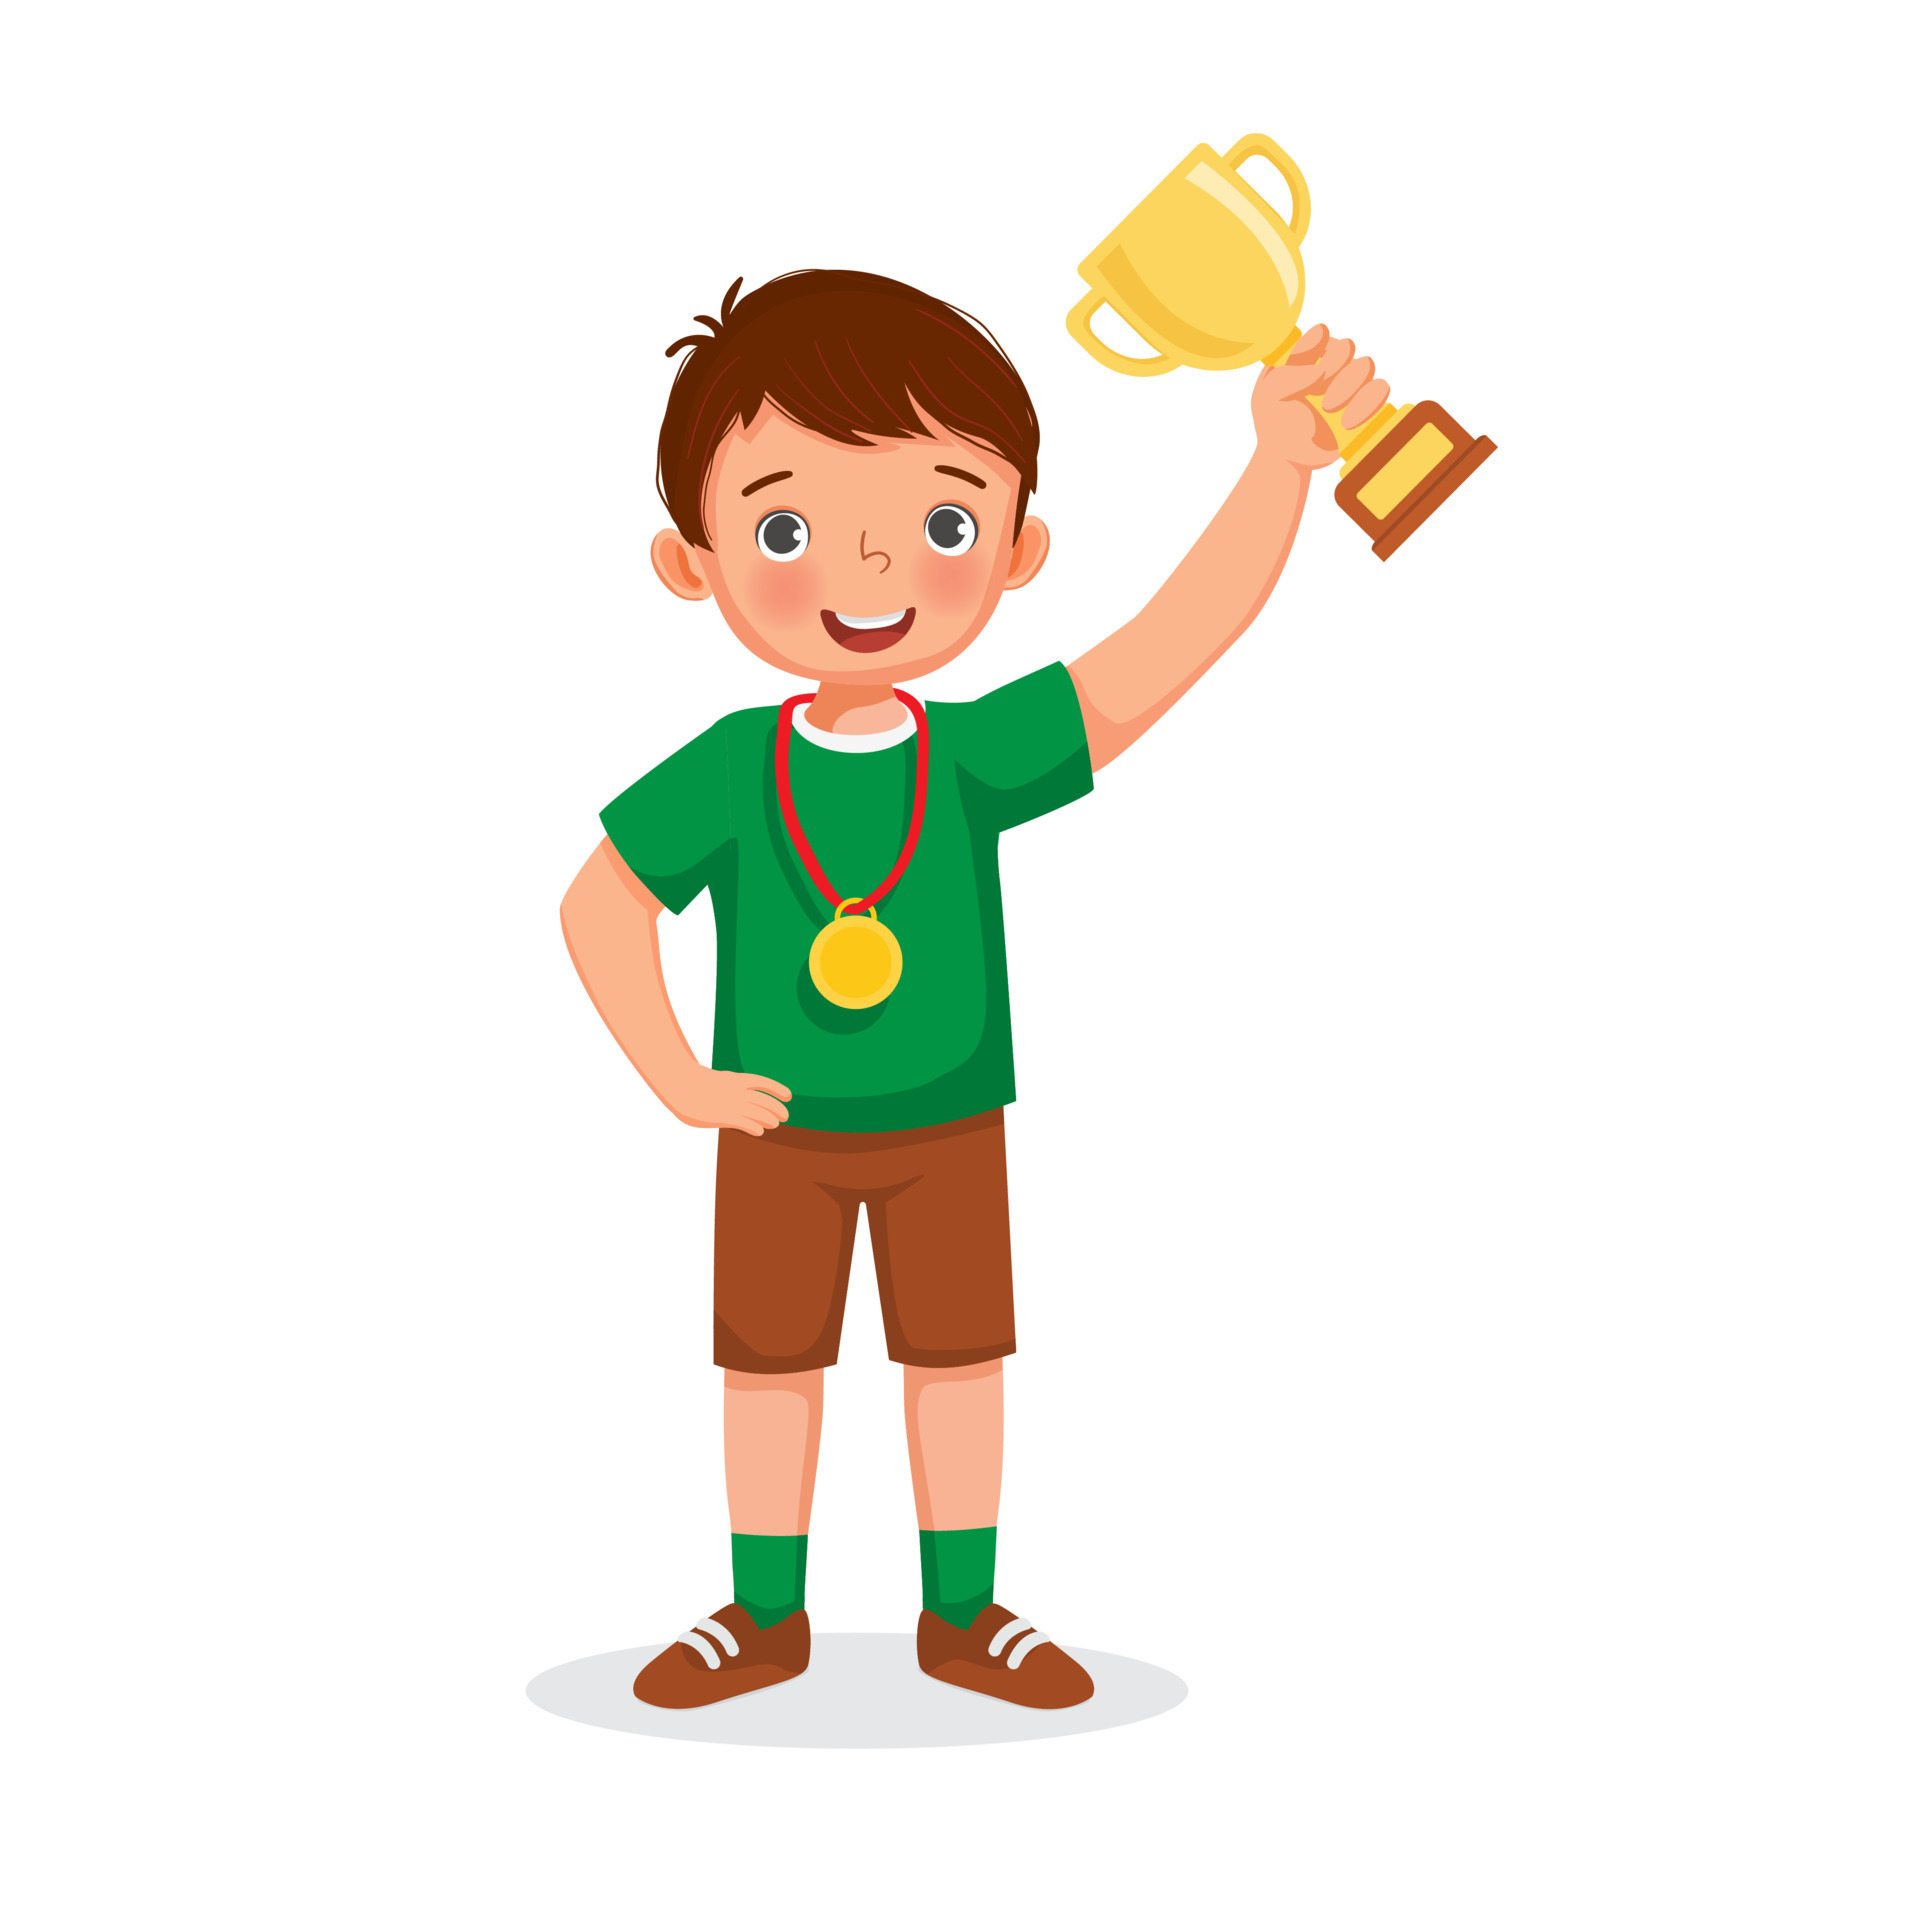 https://static.vecteezy.com/system/resources/previews/007/533/141/original/cute-little-boy-holding-up-a-gold-cup-trophy-and-medal-celebrating-winning-sport-competition-vector.jpg